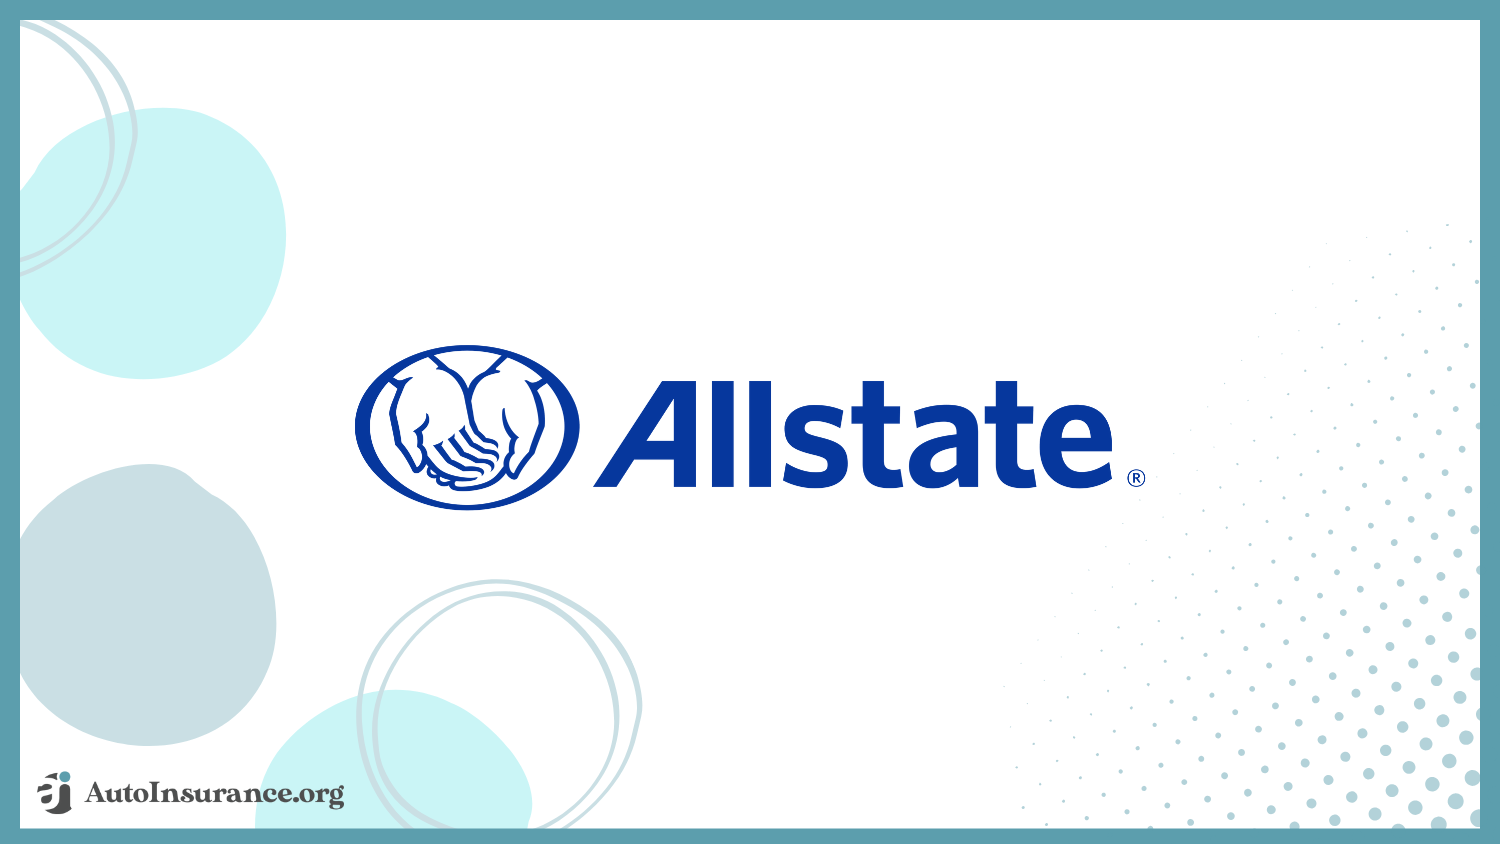 Allstate: Best Auto Insurance Companies According to Consumer Reports